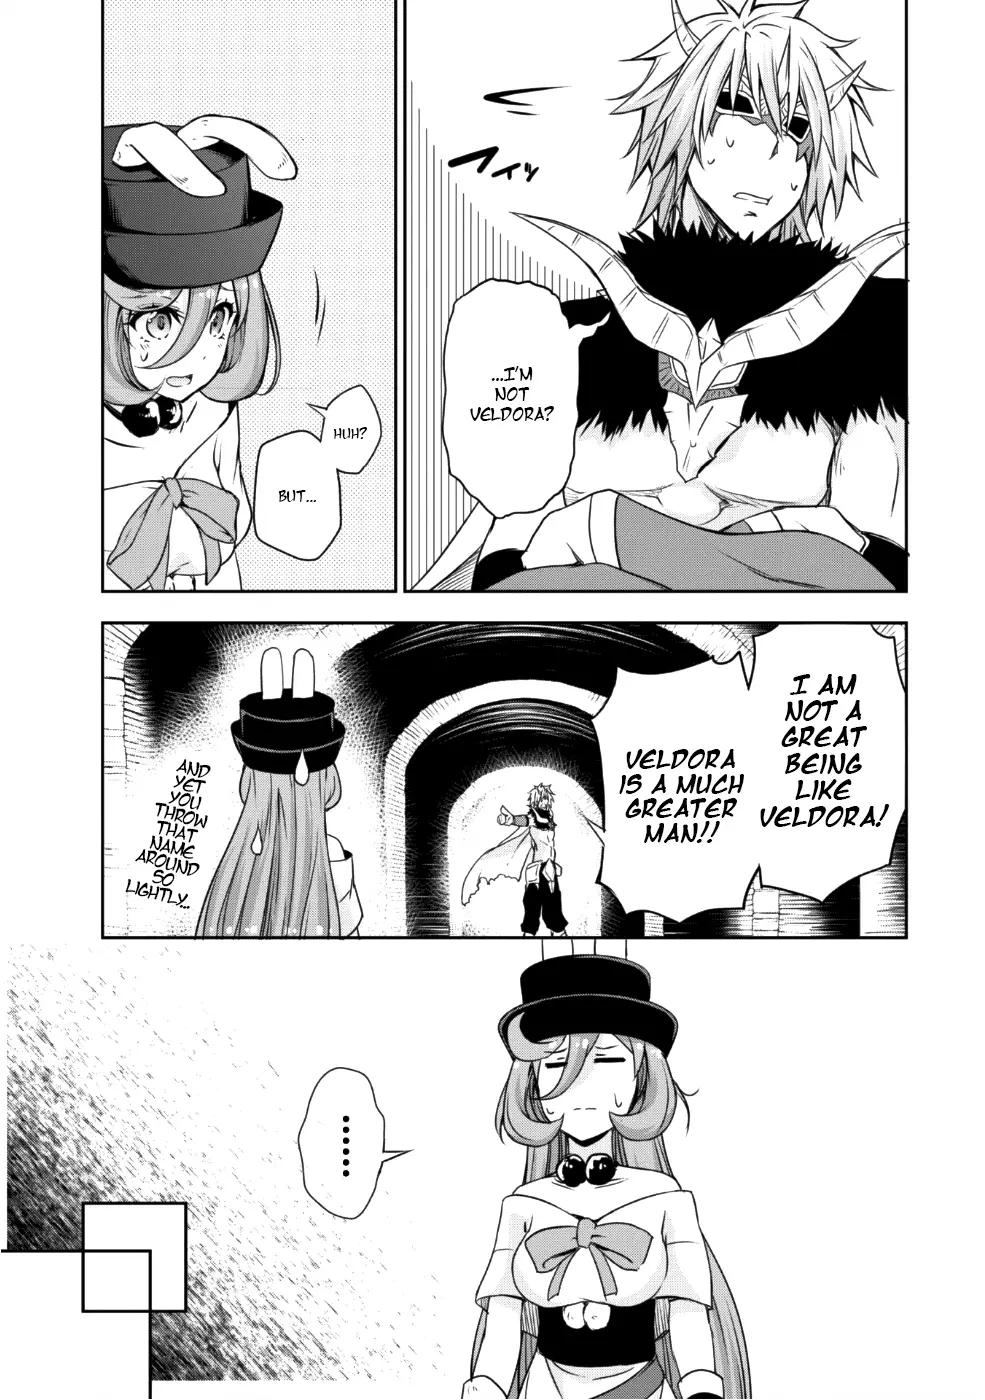 Tensei Shitara Slime Datta Ken: The Ways of Strolling in the Demon Country - 30 page 23